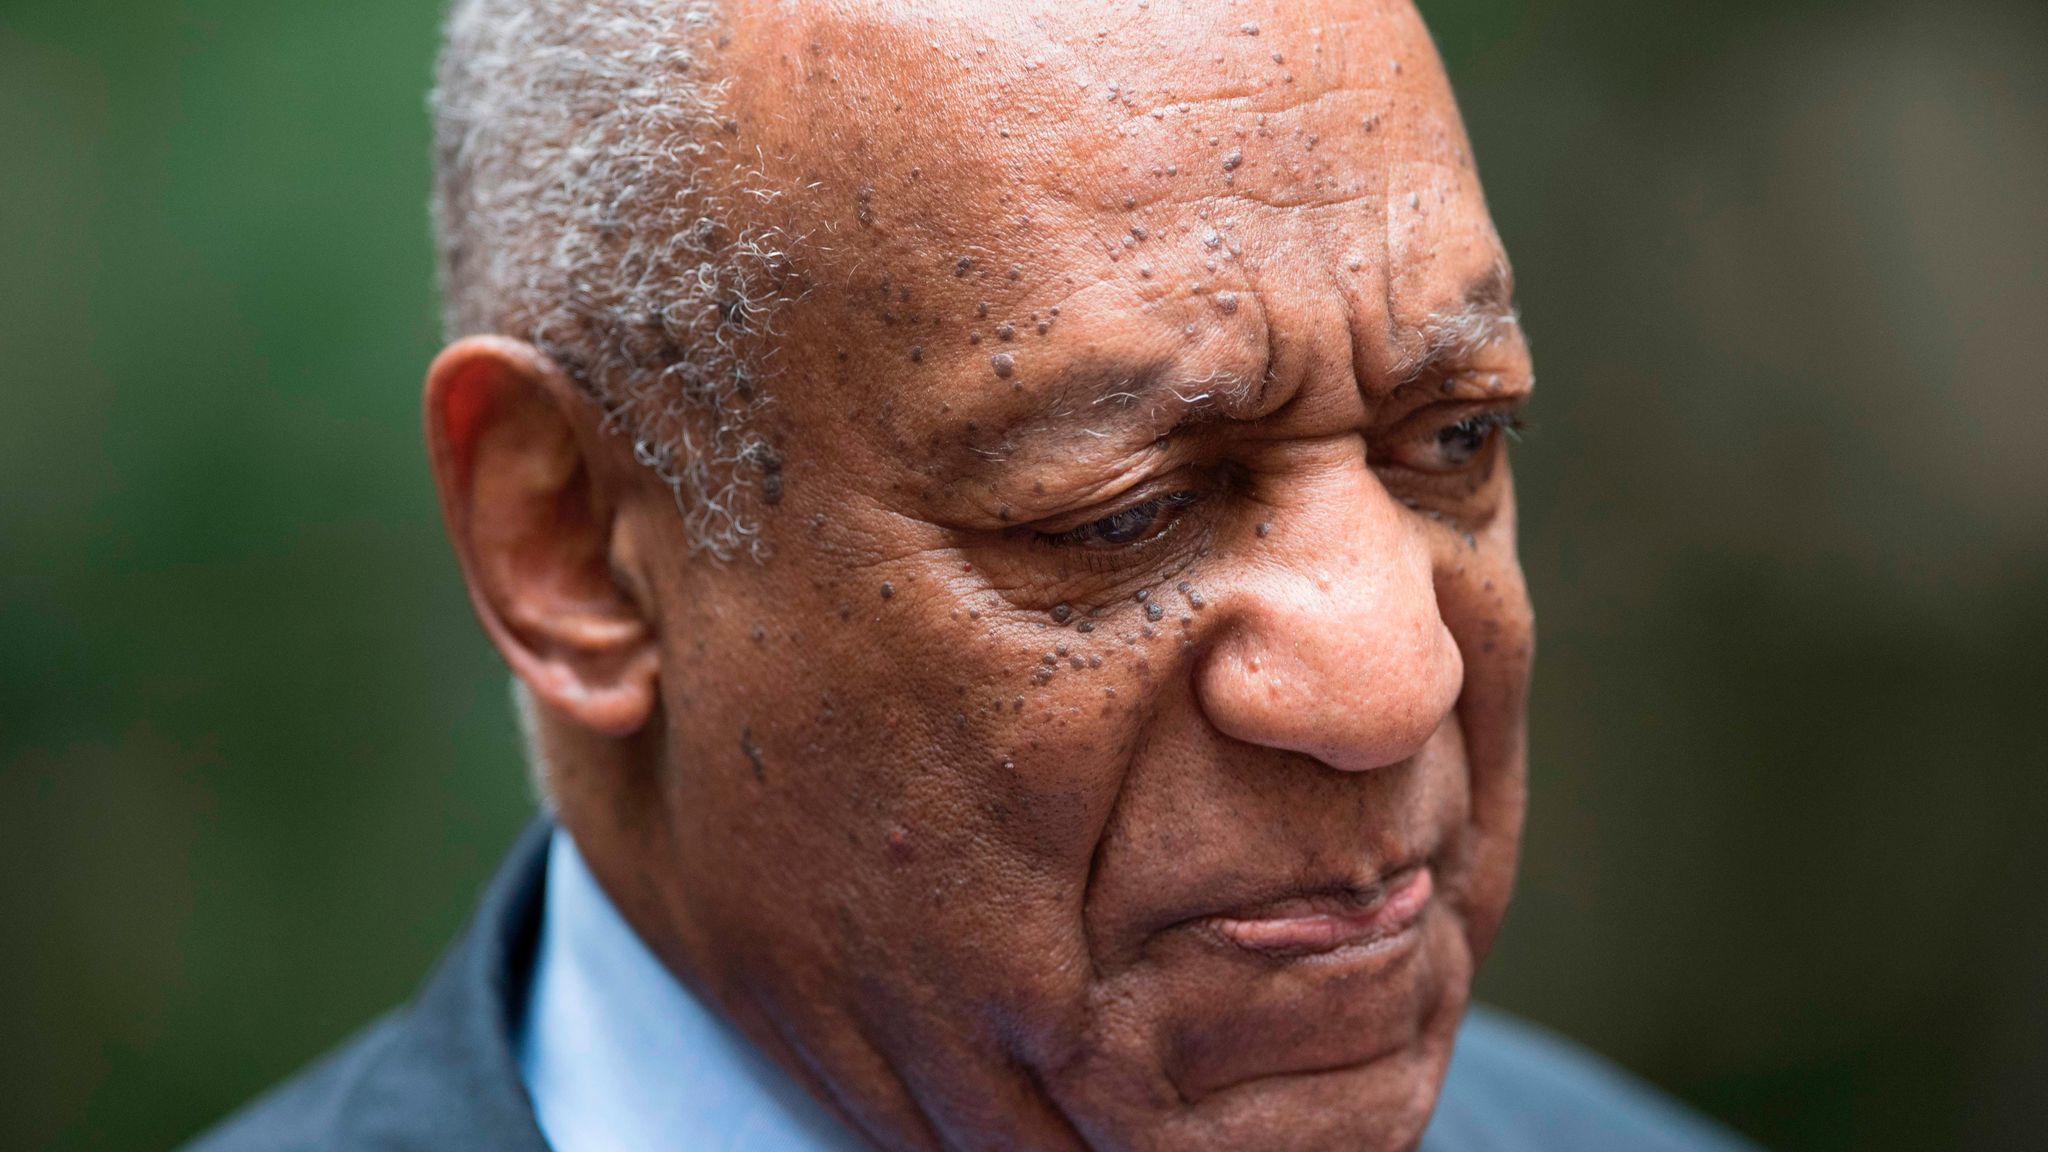 Bill Cosby talks leaves the Allegheny County Courthouse on May 24.